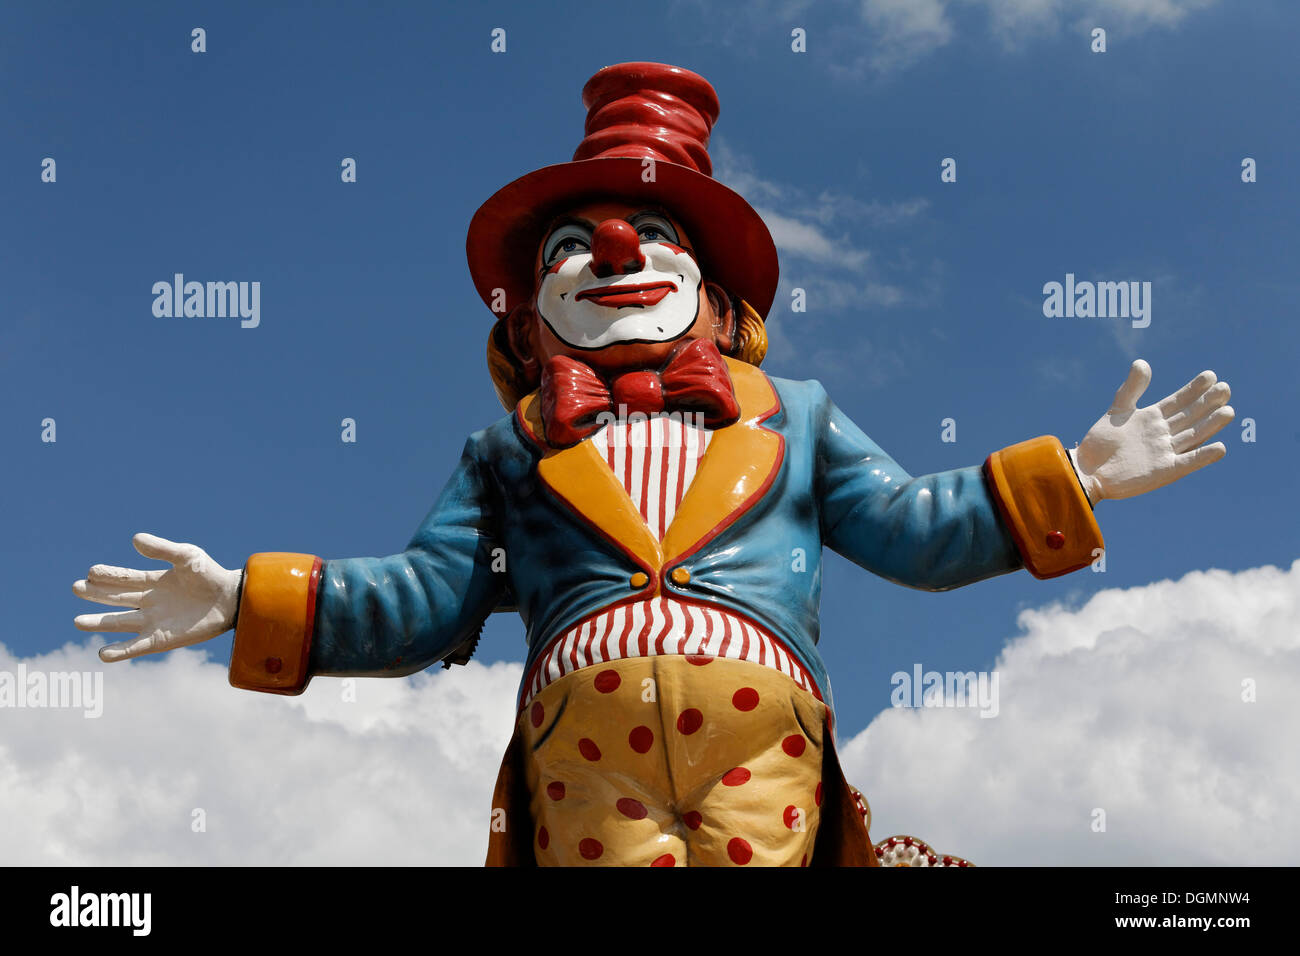 Clown with a top hat and extended arms, fun fair figure Stock Photo